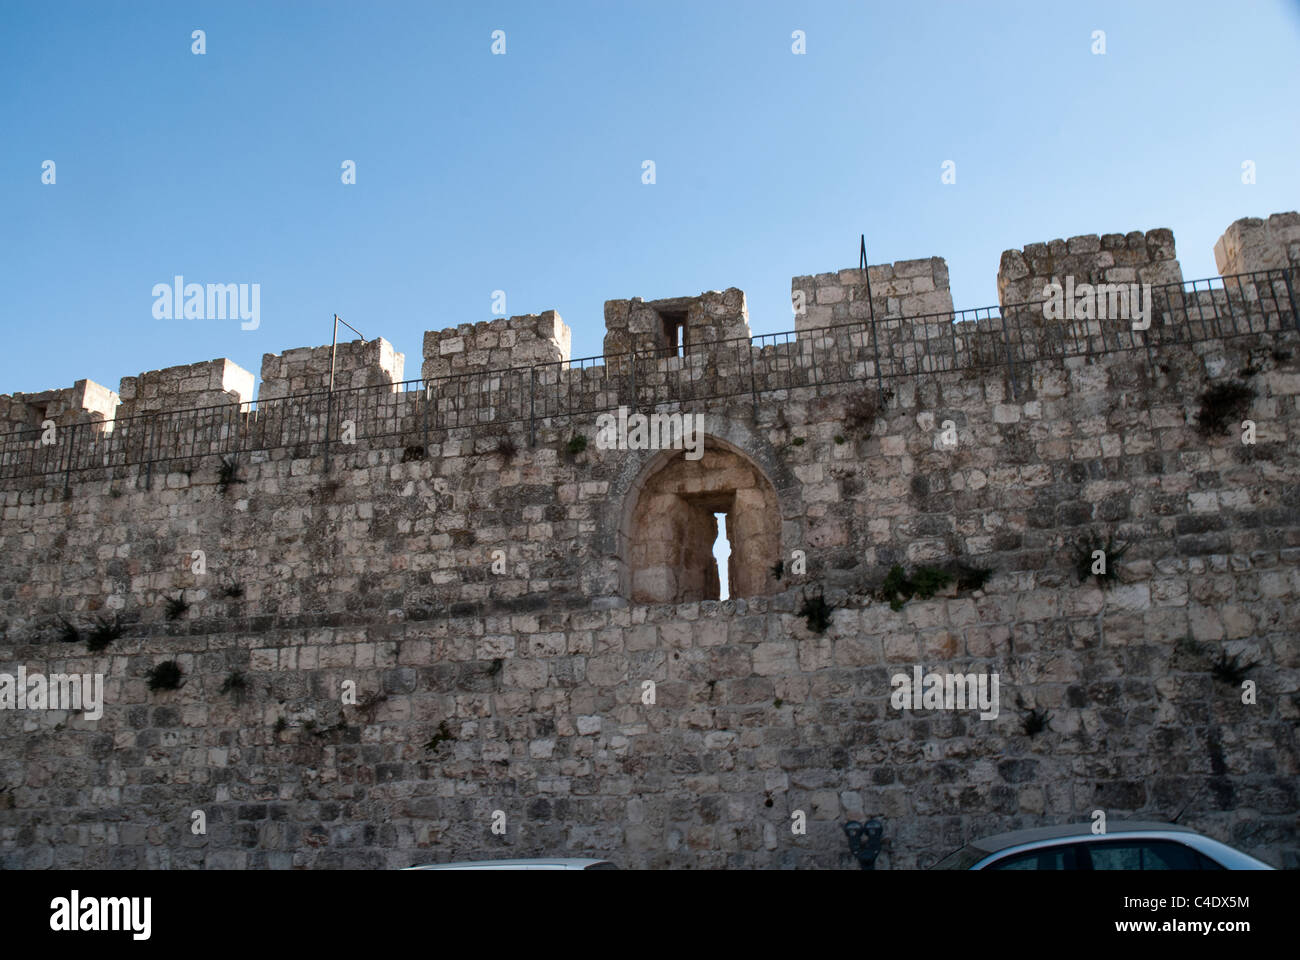 Jerusalem is a holy city to the three major Abrahamic religions—Judaism, Christianity and Islam. Stock Photo